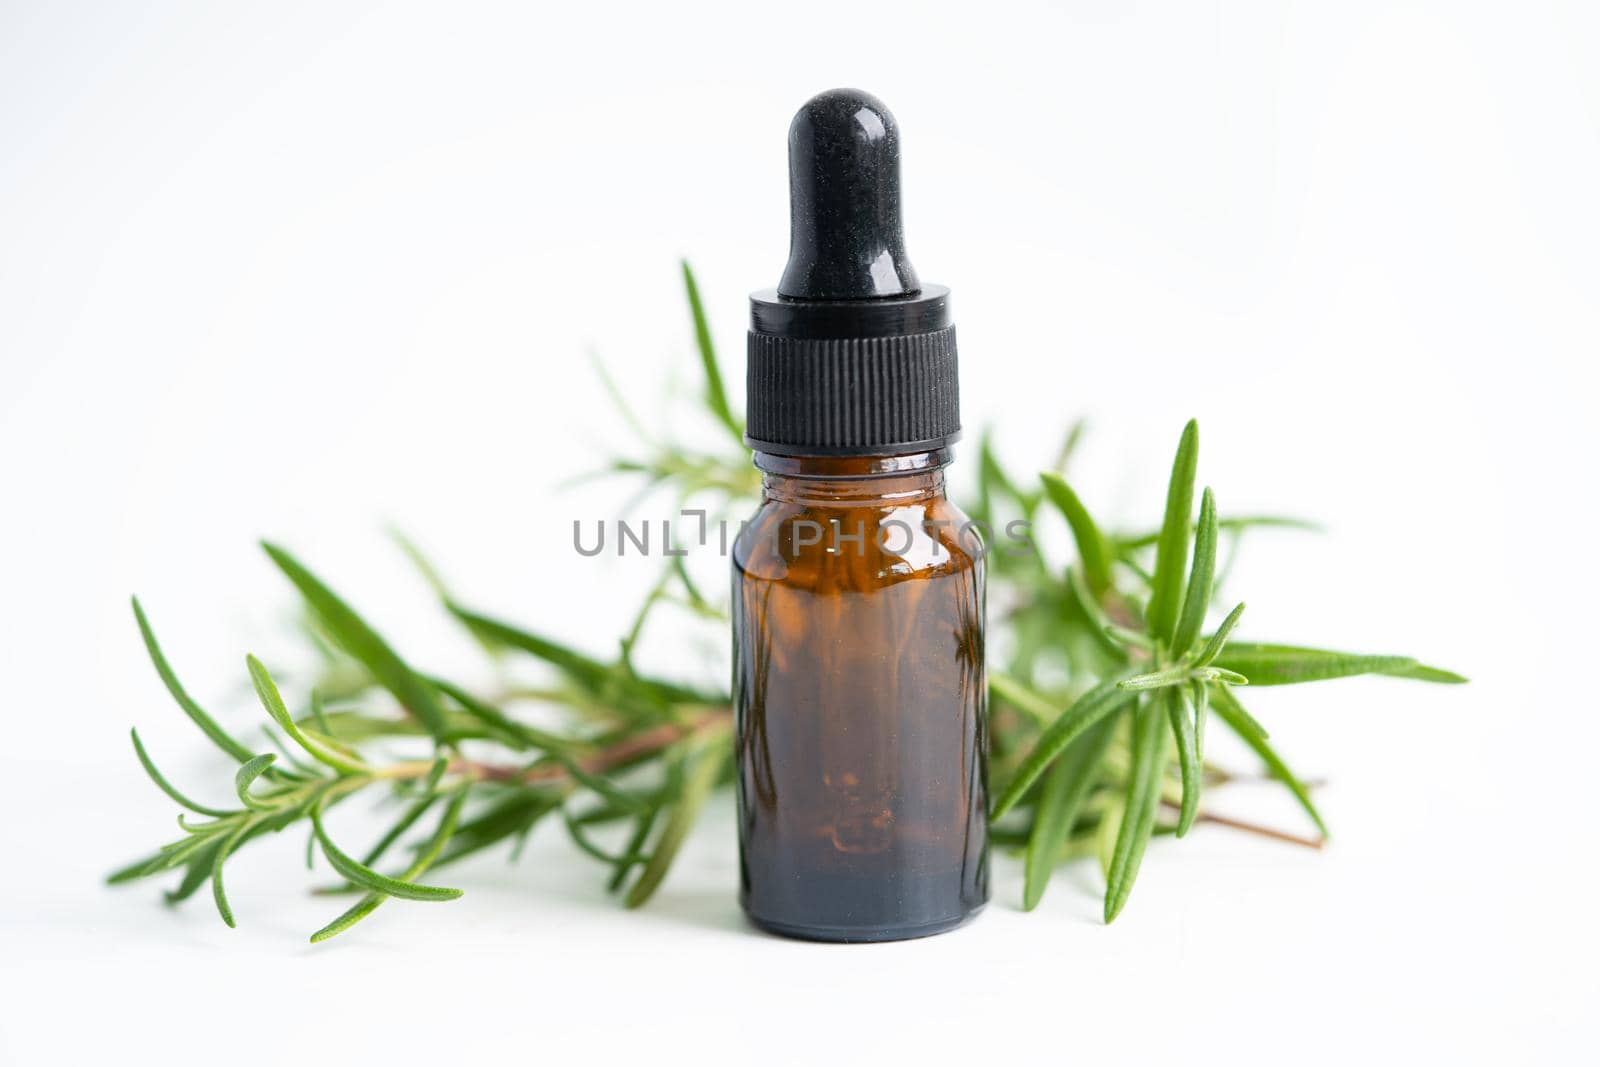 Rosemary aromatic essential oil fresh bunch herb with aromatherapy herbal bottle.